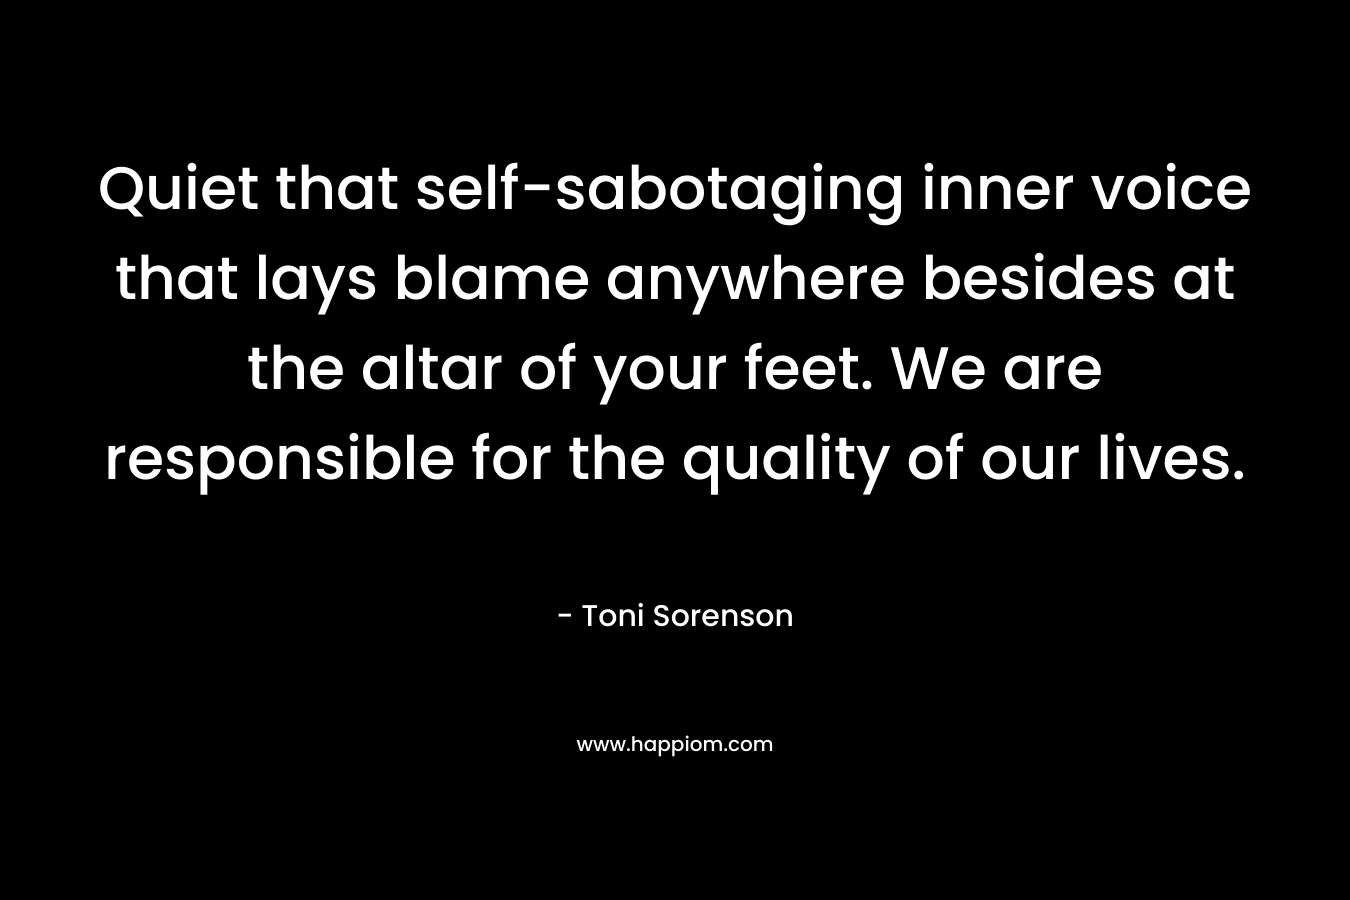 Quiet that self-sabotaging inner voice that lays blame anywhere besides at the altar of your feet. We are responsible for the quality of our lives. – Toni Sorenson